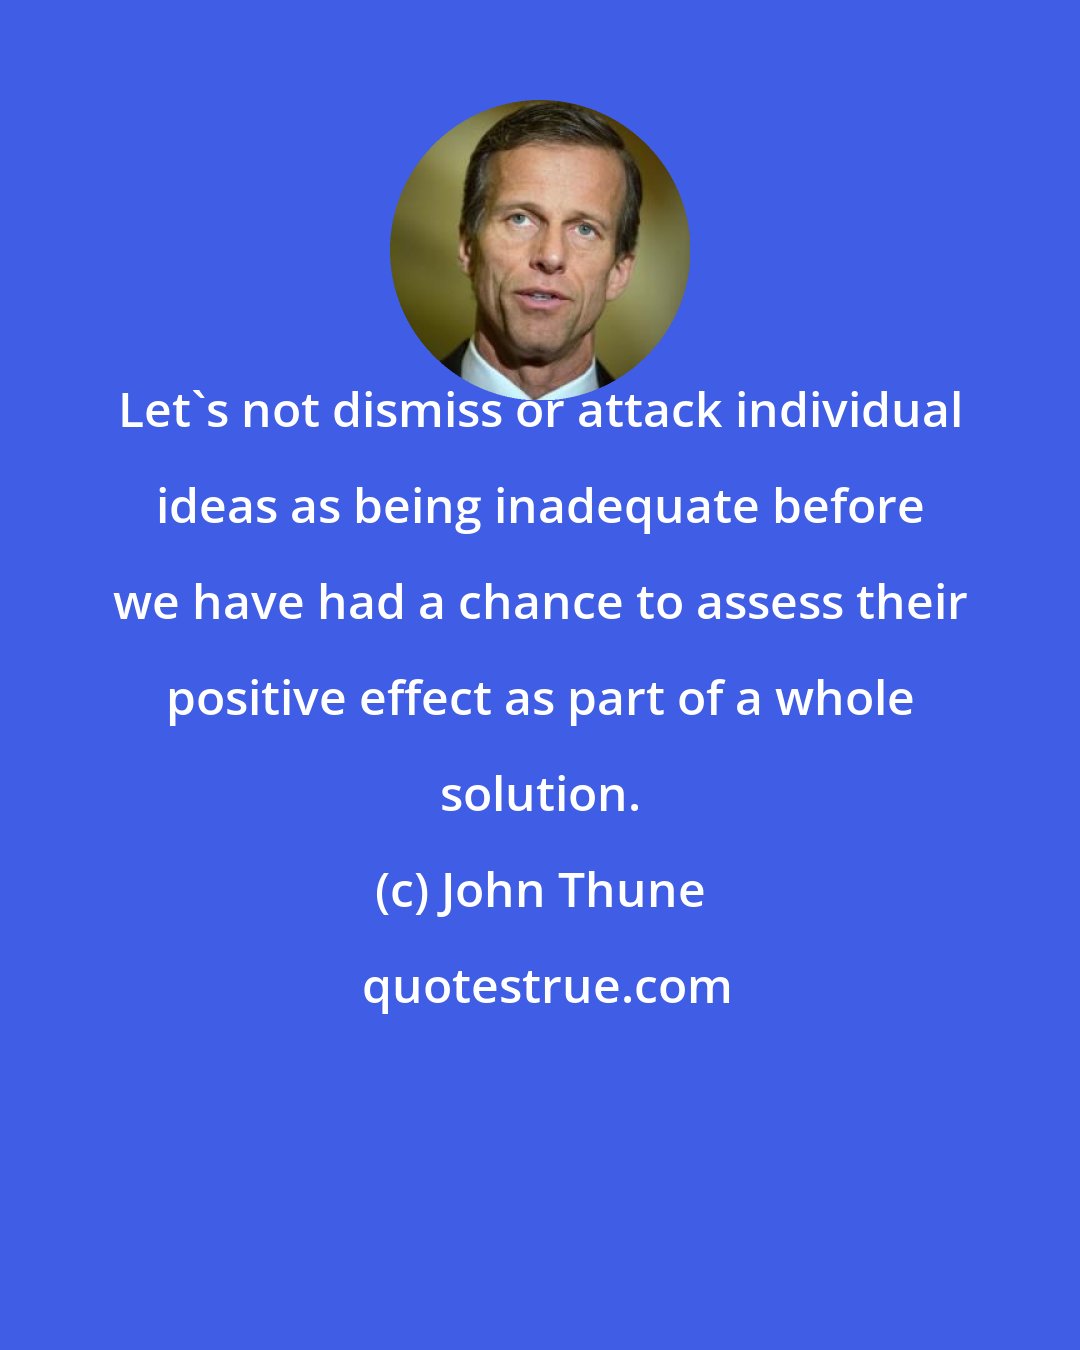 John Thune: Let's not dismiss or attack individual ideas as being inadequate before we have had a chance to assess their positive effect as part of a whole solution.